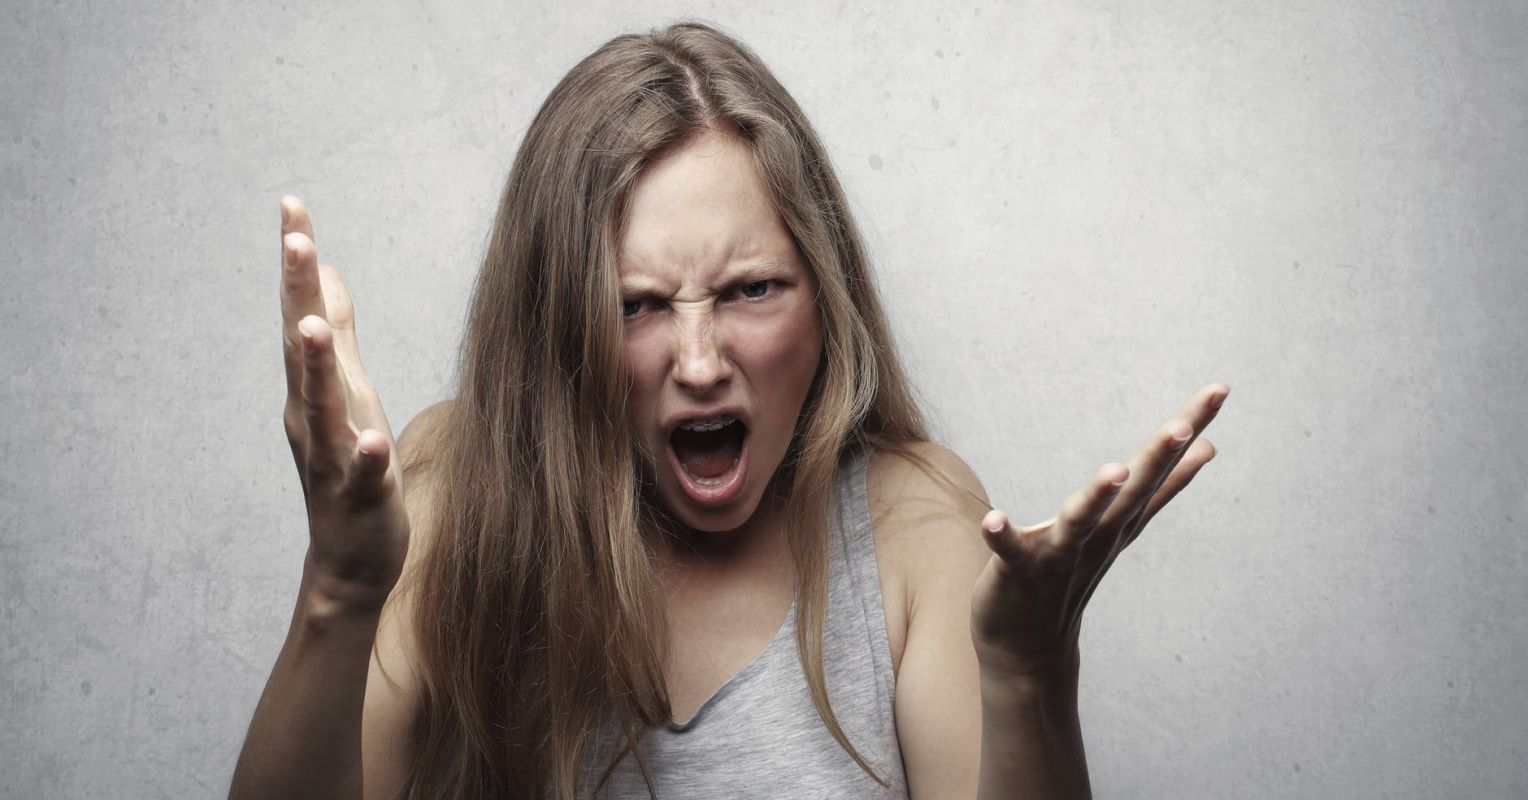 Top 10 Causes of Anger: How to Recognize and Deal with Anger